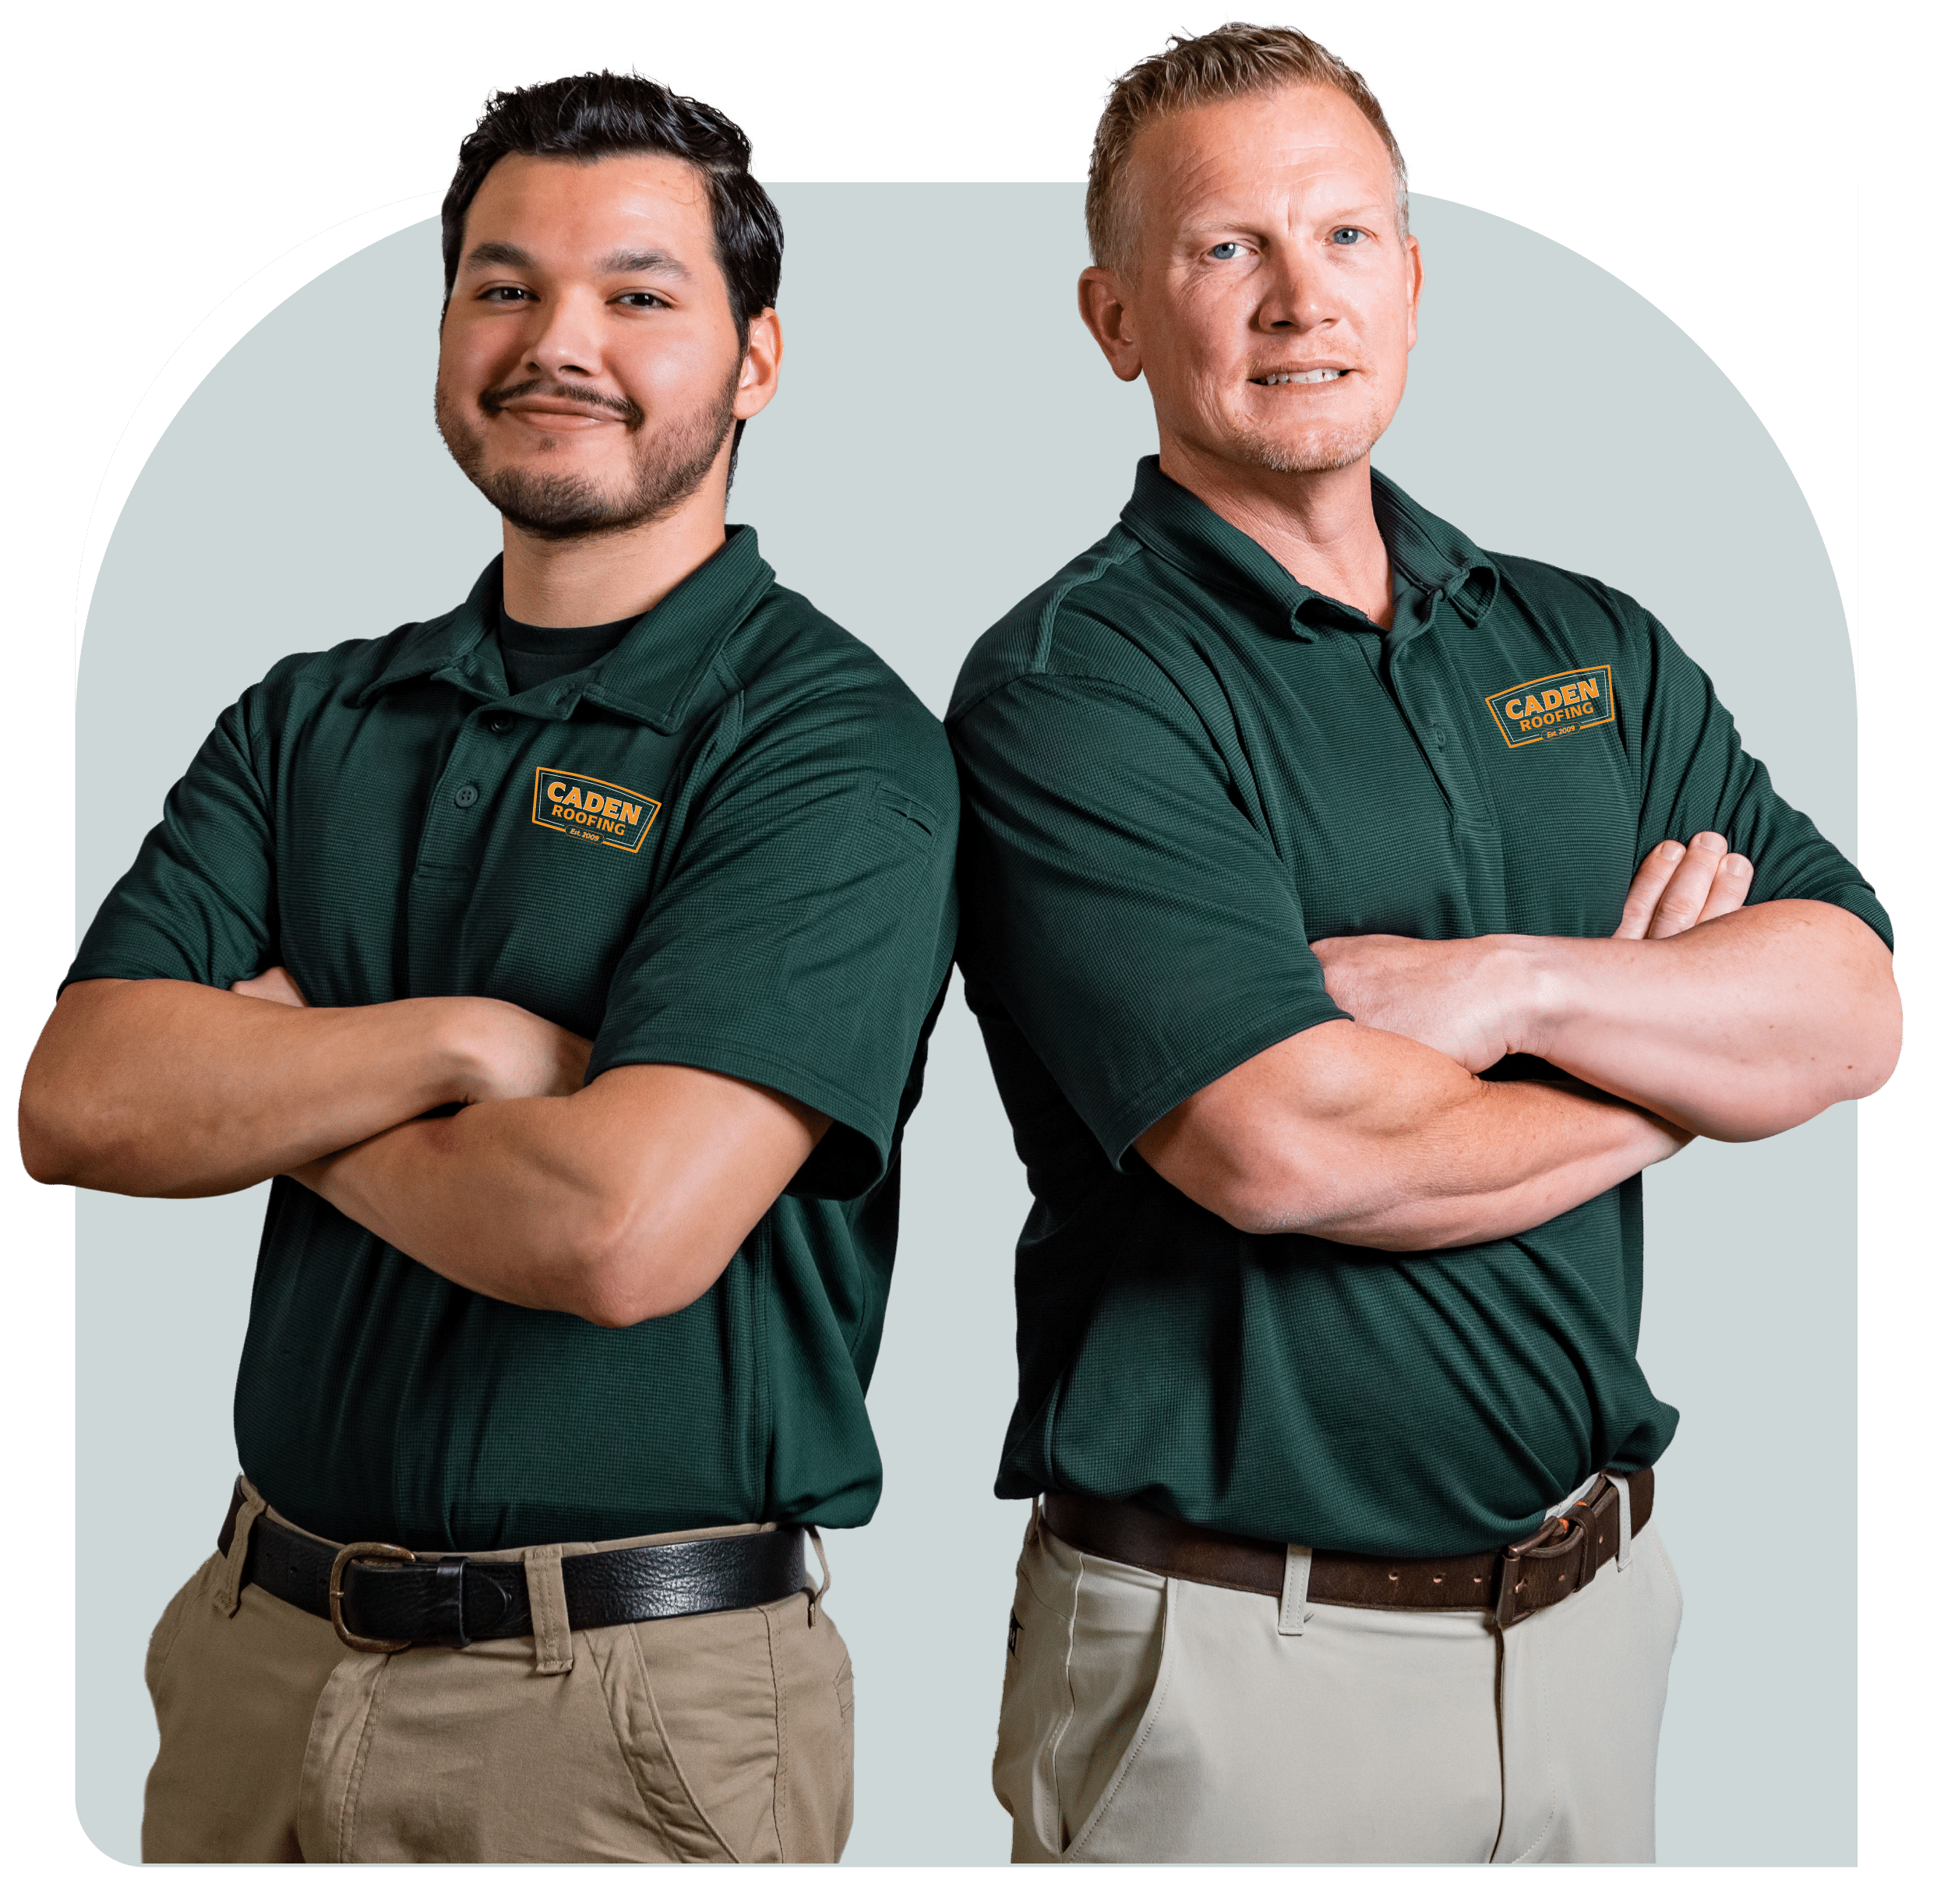 2 Employees of Caden Roofing Standing Next To Each Other